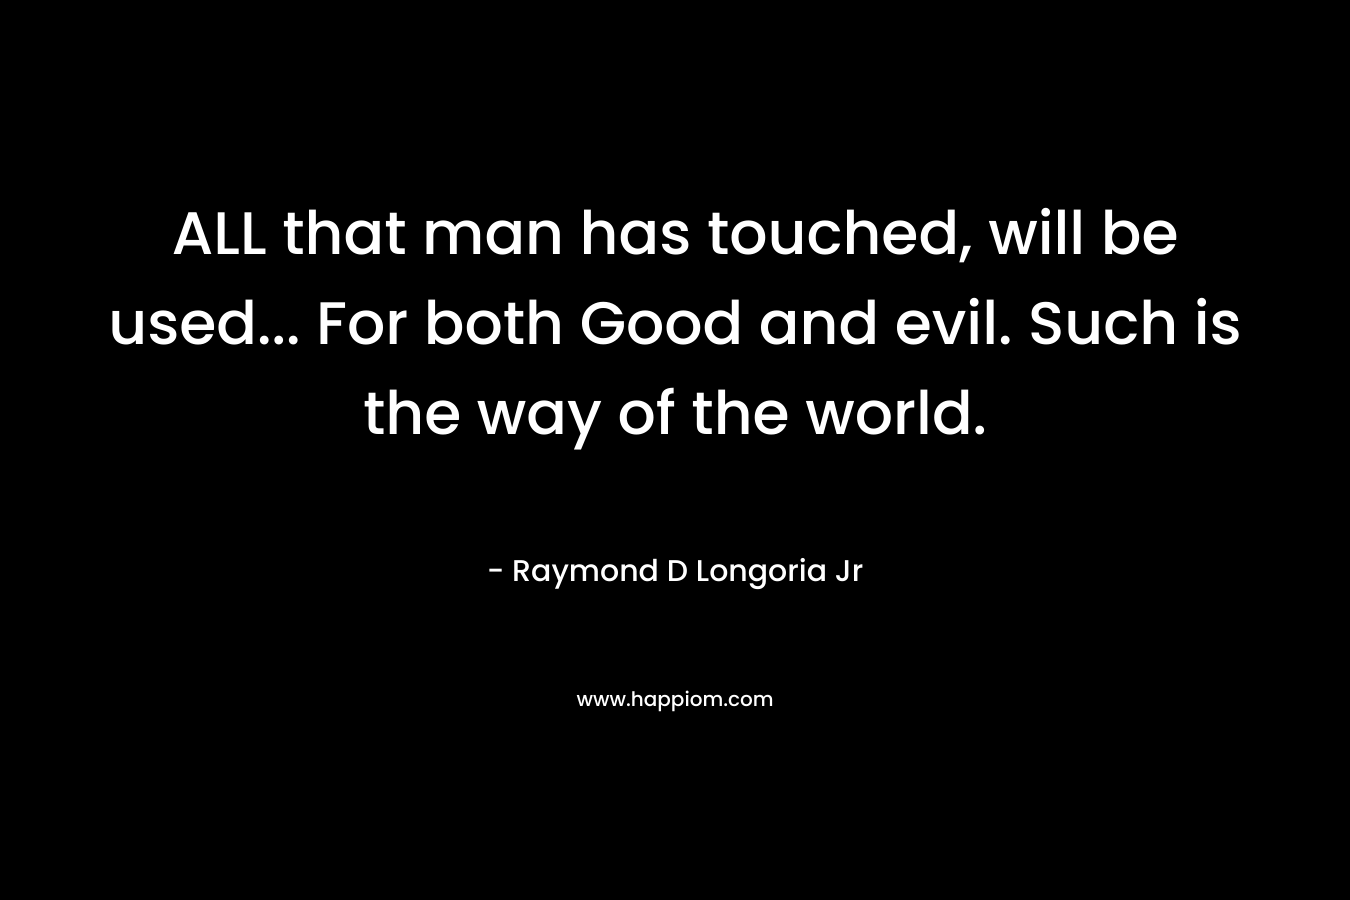 ALL that man has touched, will be used... For both Good and evil. Such is the way of the world.